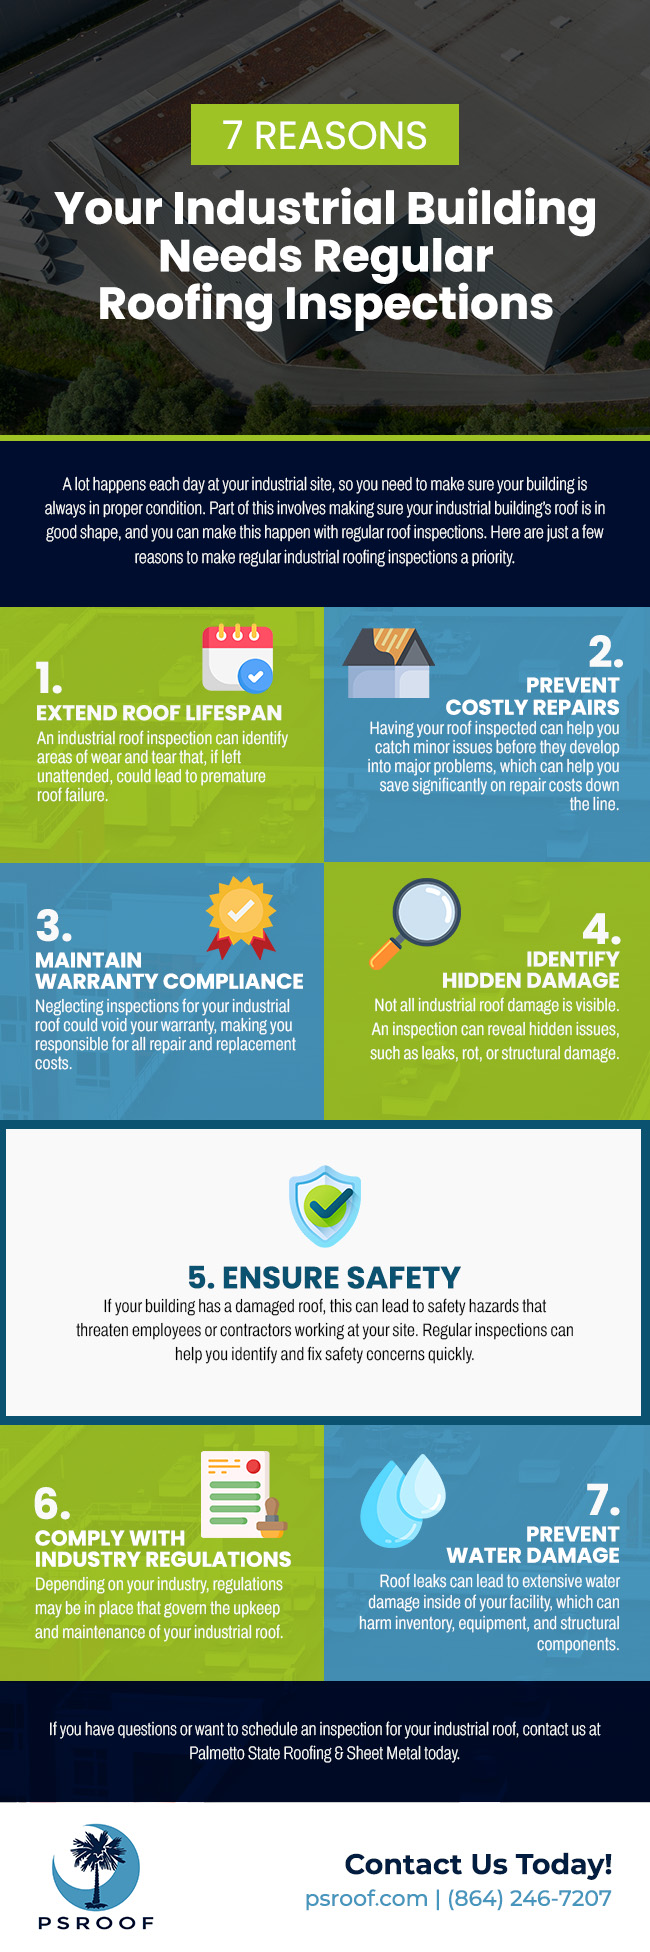 7 Reasons Your Industrial Building Needs Regular Roofing Inspections 